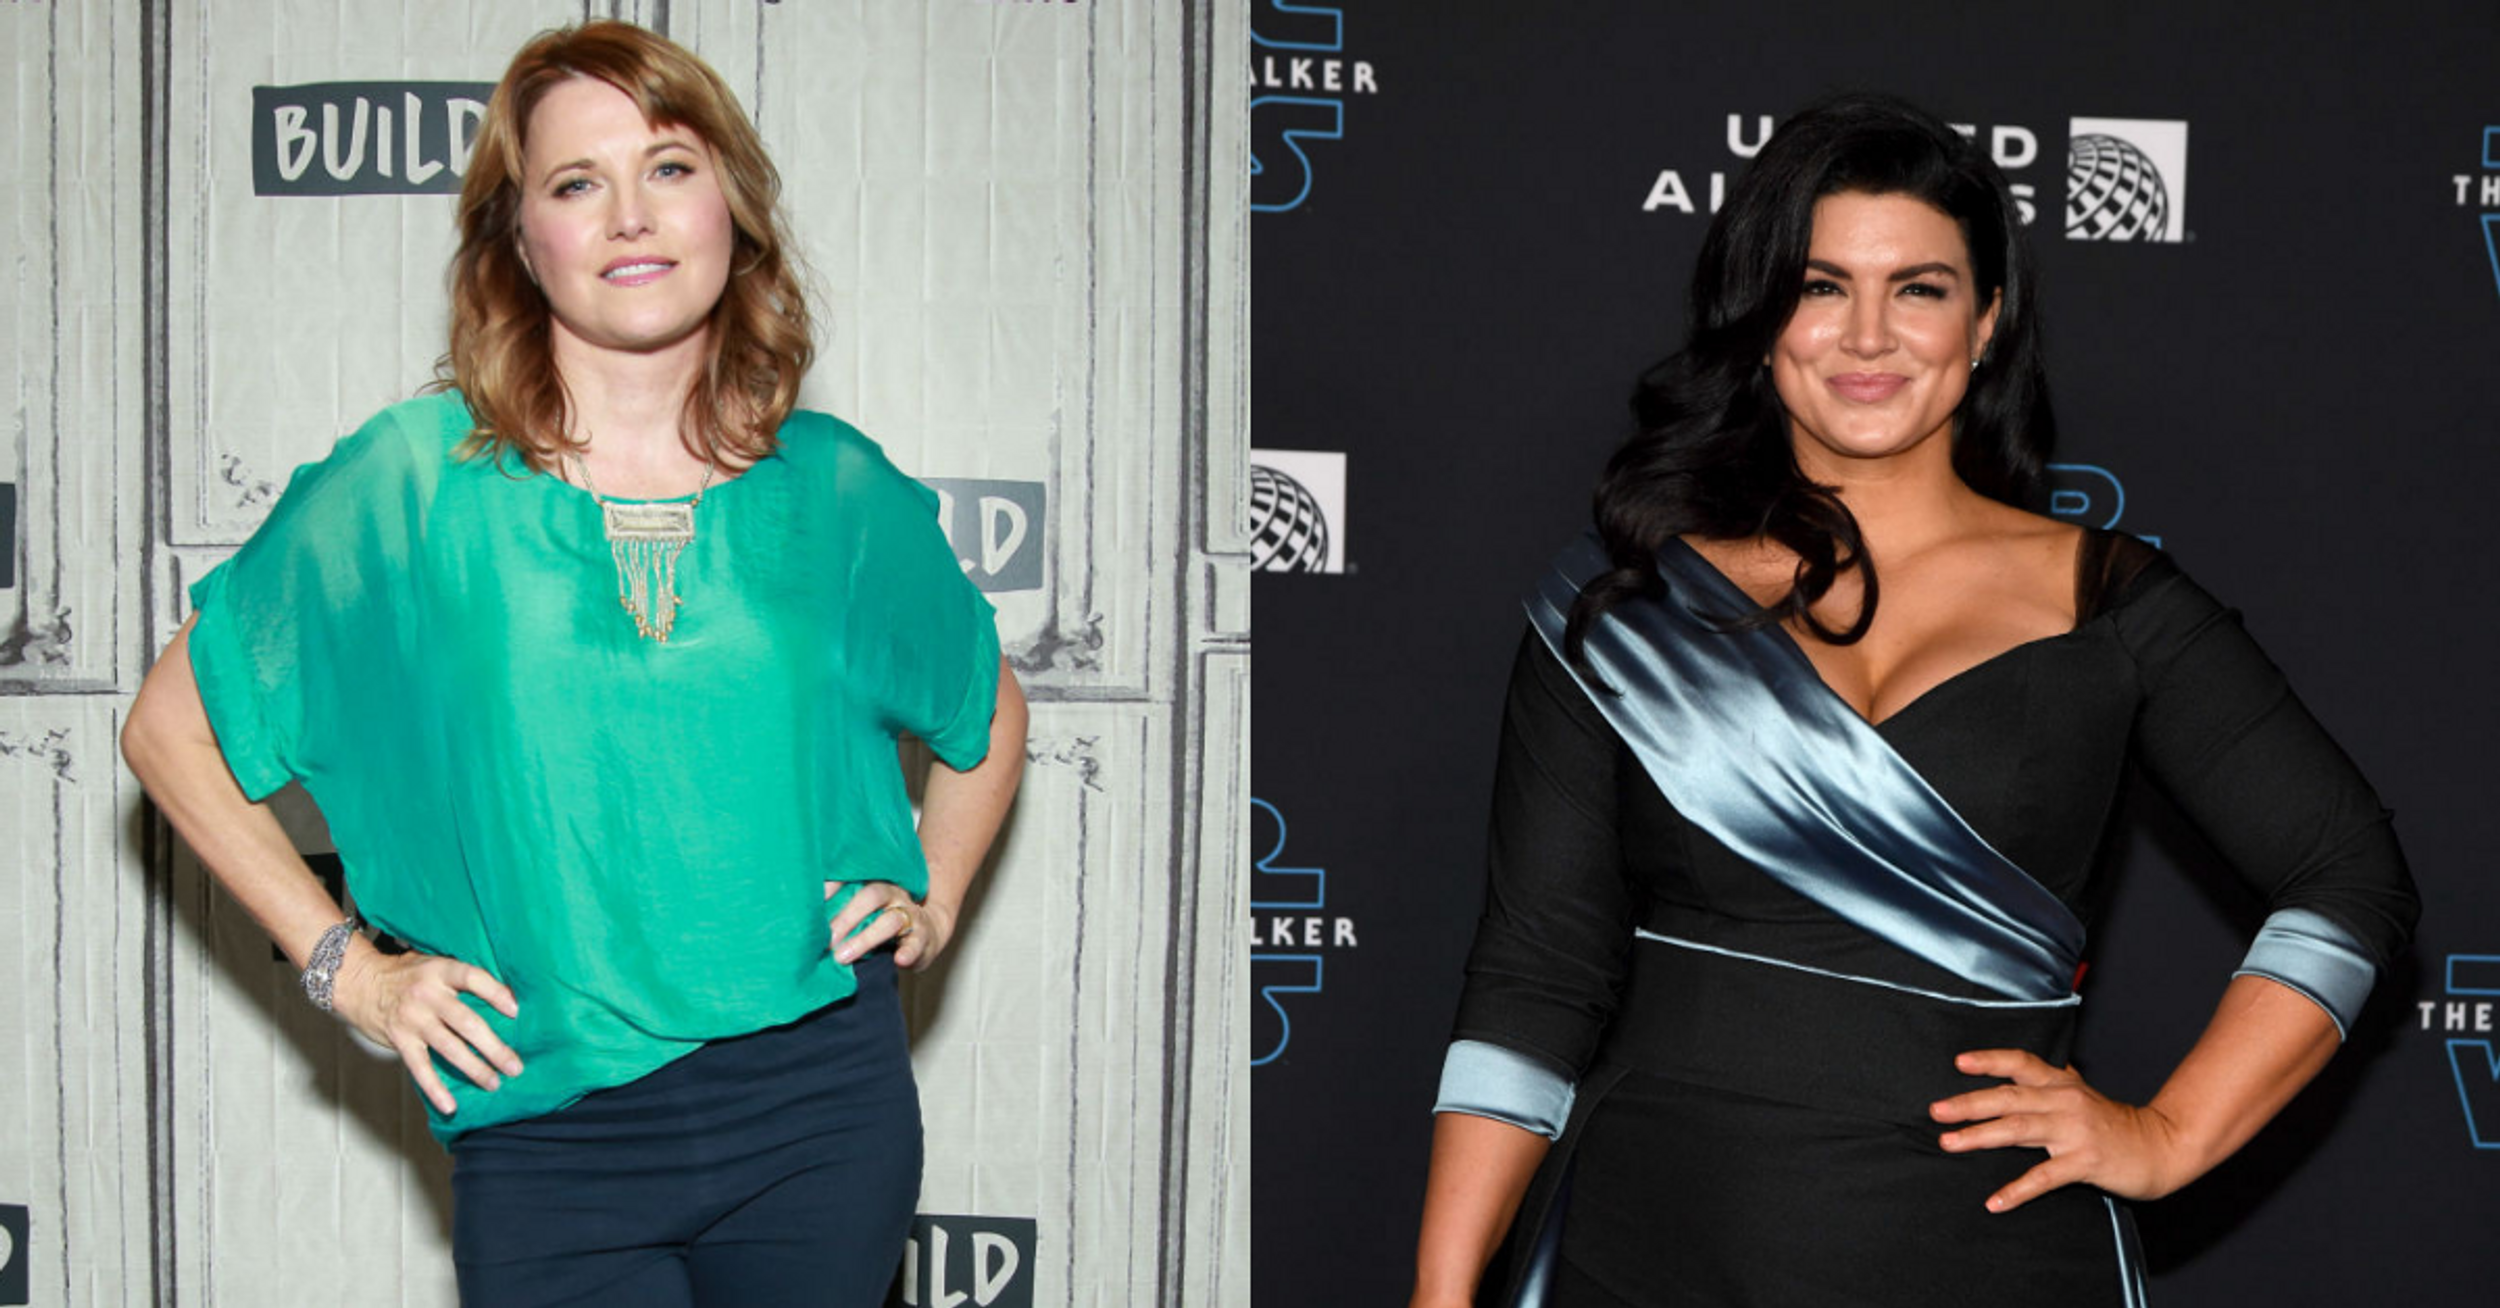 Lucy Lawless Explains How Fan Push To Have Her Replace Gina Carano May Have Actually Backfired